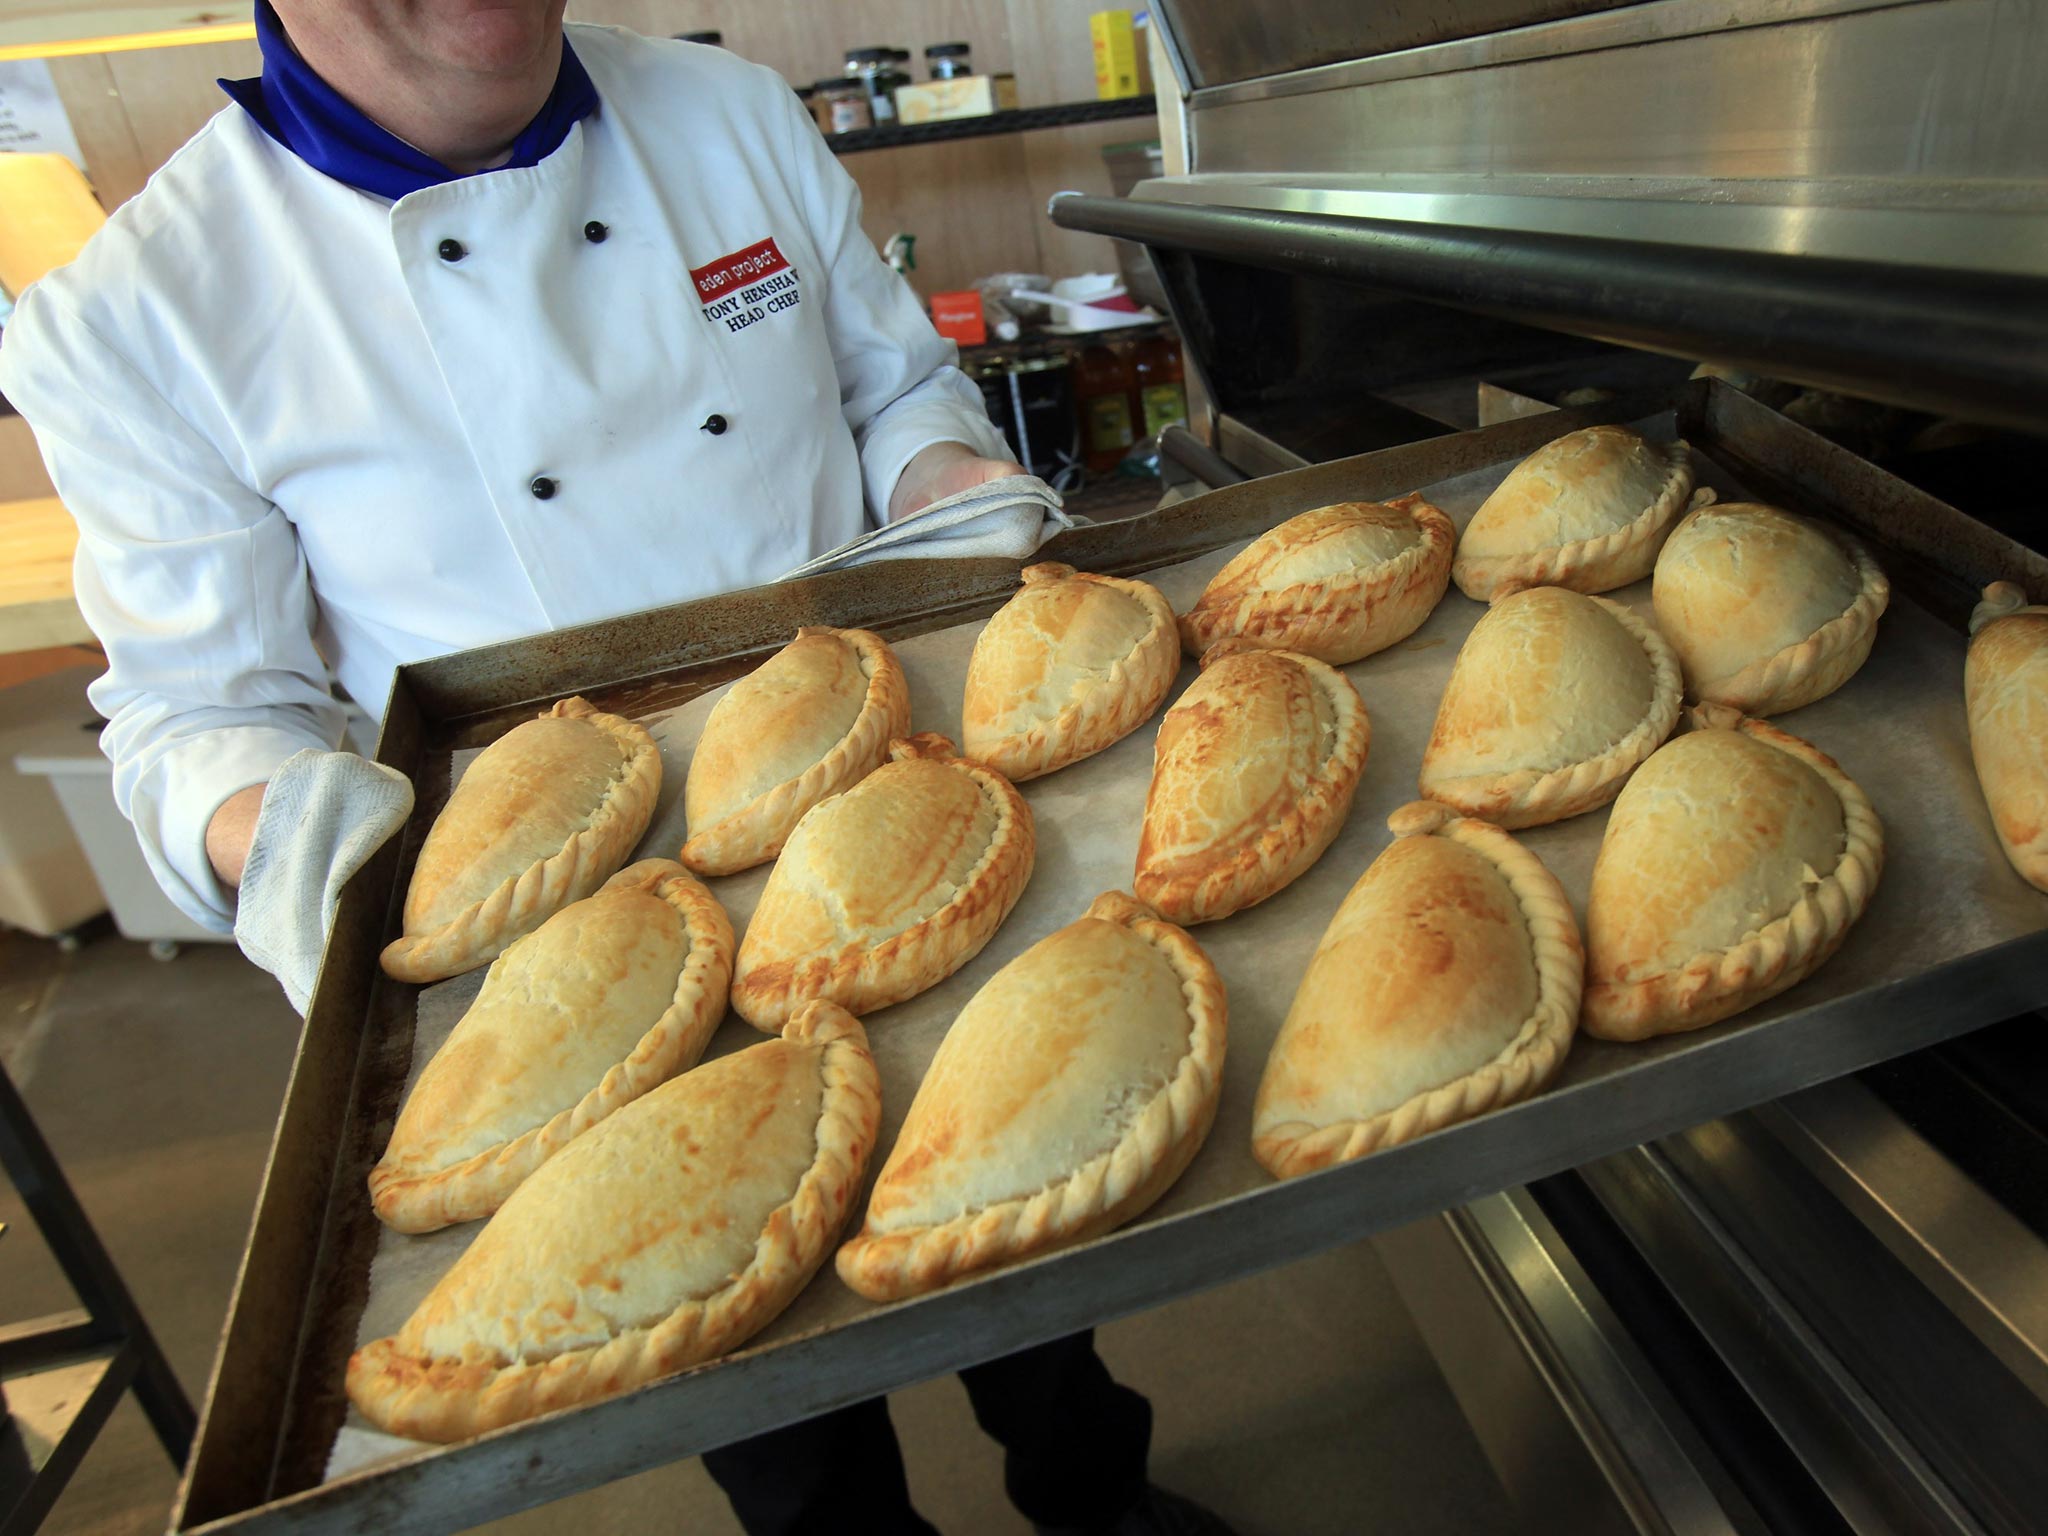 Cornish pasties are said to be 'under threat' from a transatlantic deal that could see the traditional snack lose its legal protection